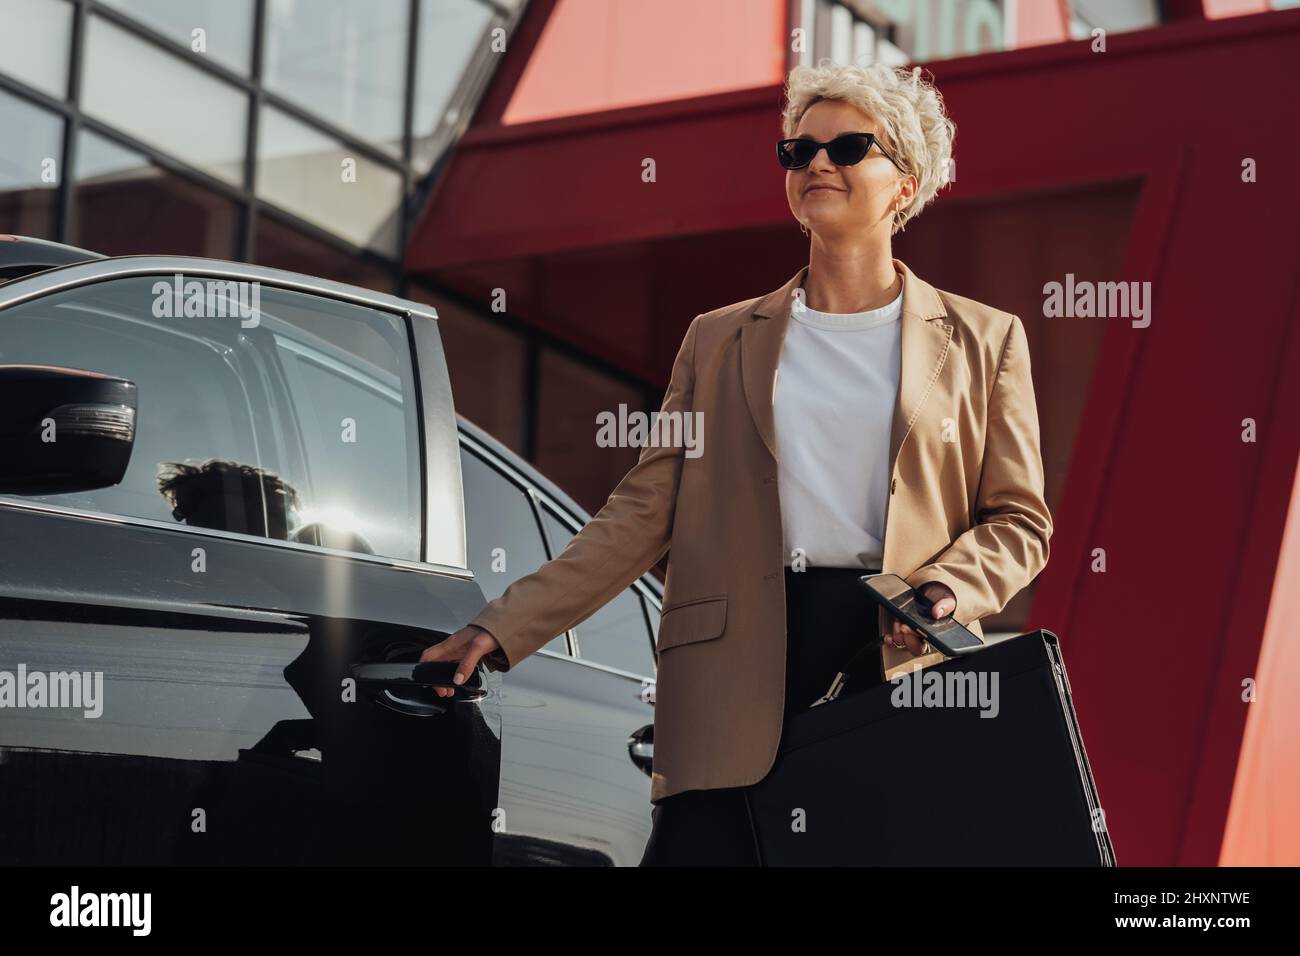 Elegant Female Entrepreneur with Briefcase in Hand Opening Door of the Luxury Car Stock Photo